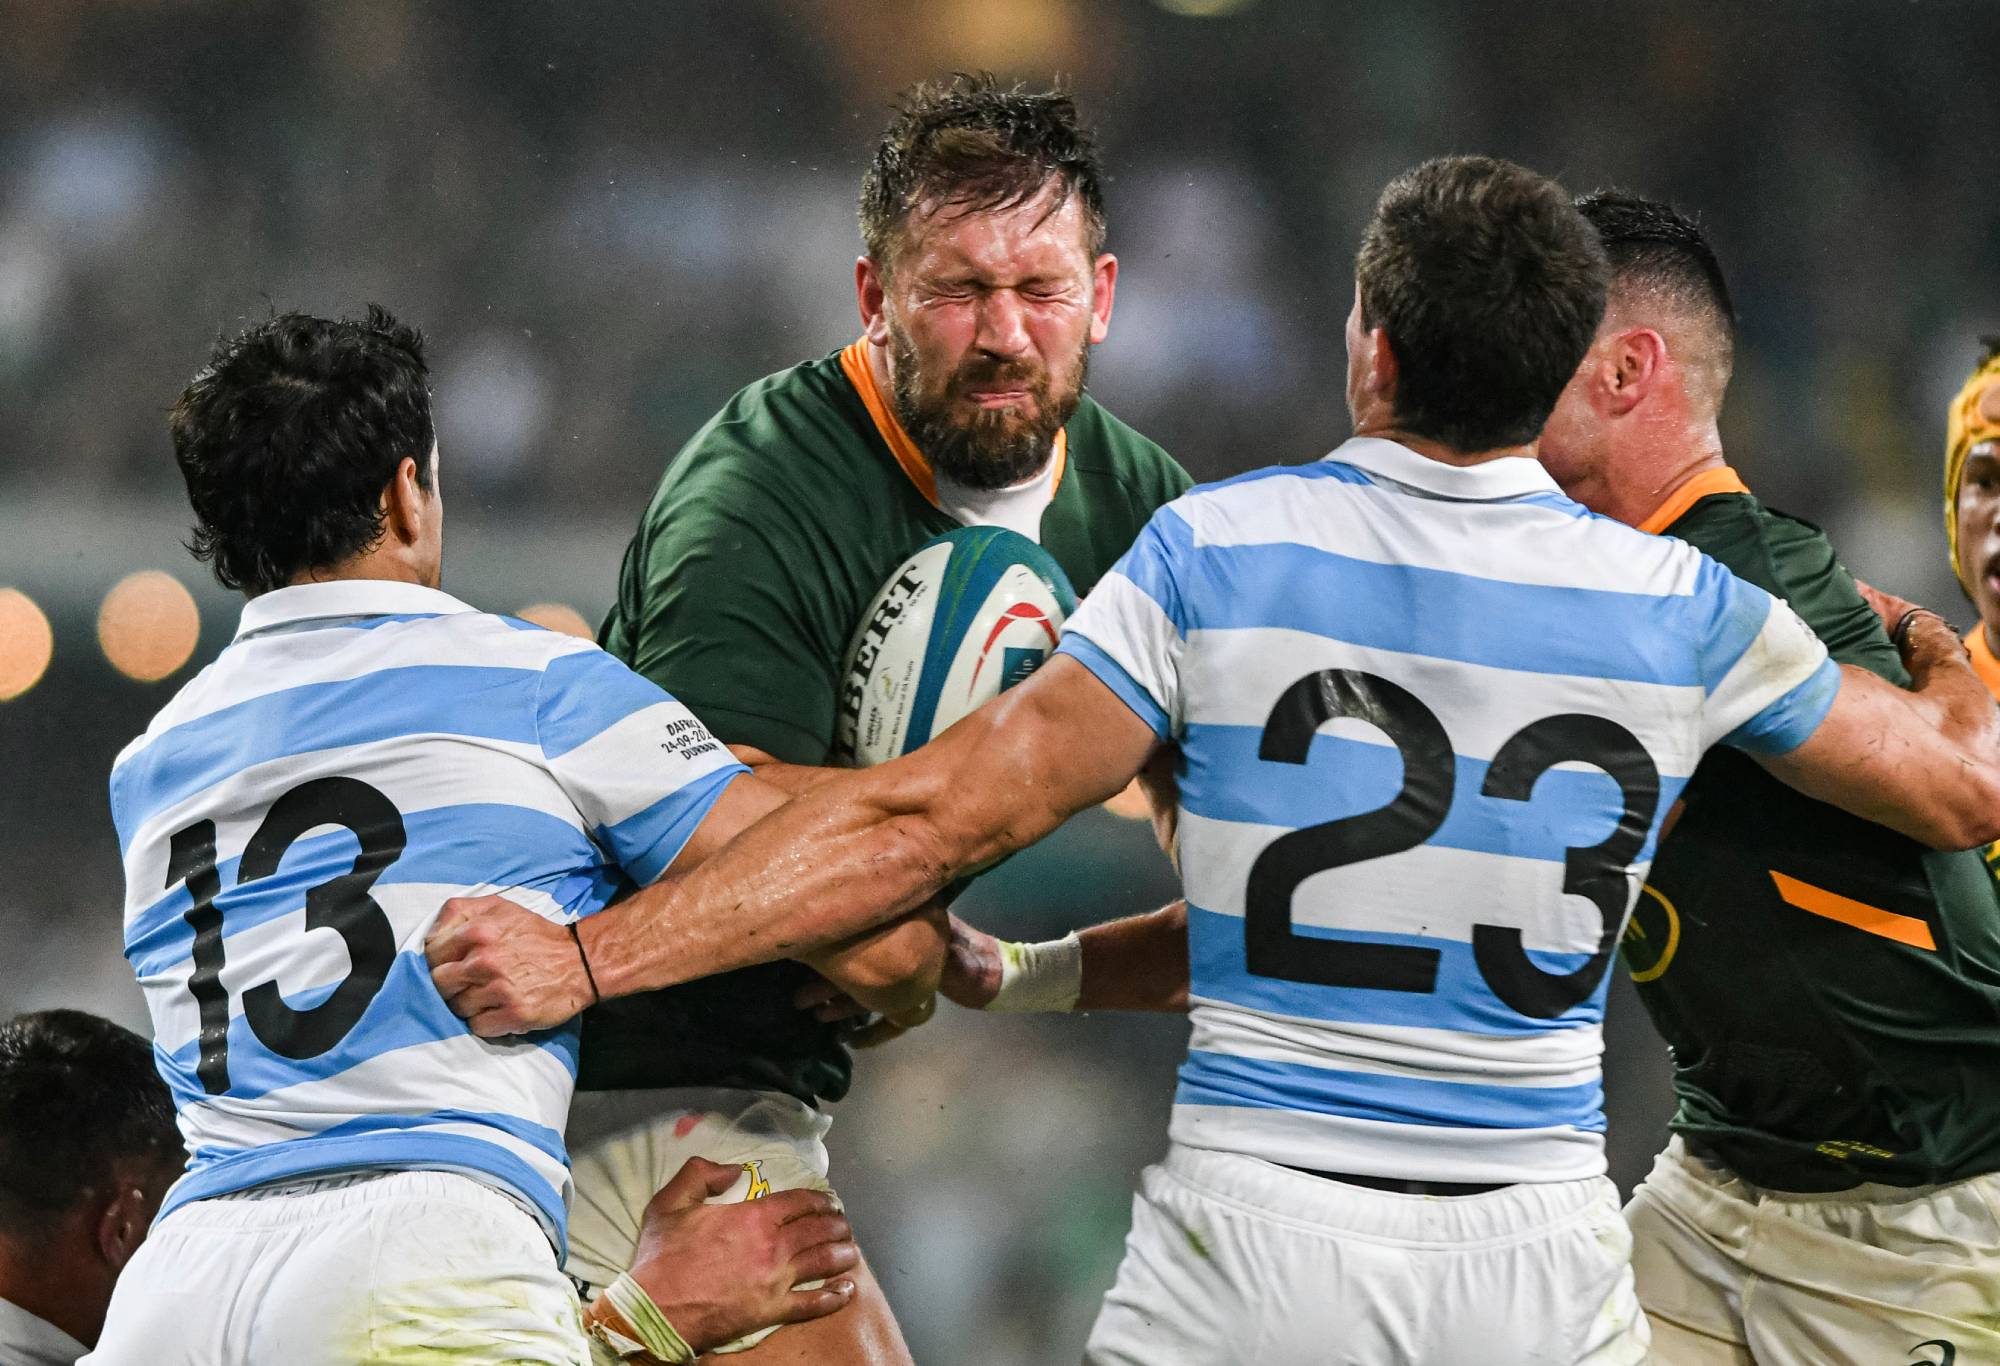 Frans Steyn of South Africa is tackled during The Rugby Championship match between South Africa and Argentina at Hollywoodbets Kings Park on September 24, 2022 in Durban, South Africa. (Photo by Darren Stewart/Gallo Images/Getty Images)